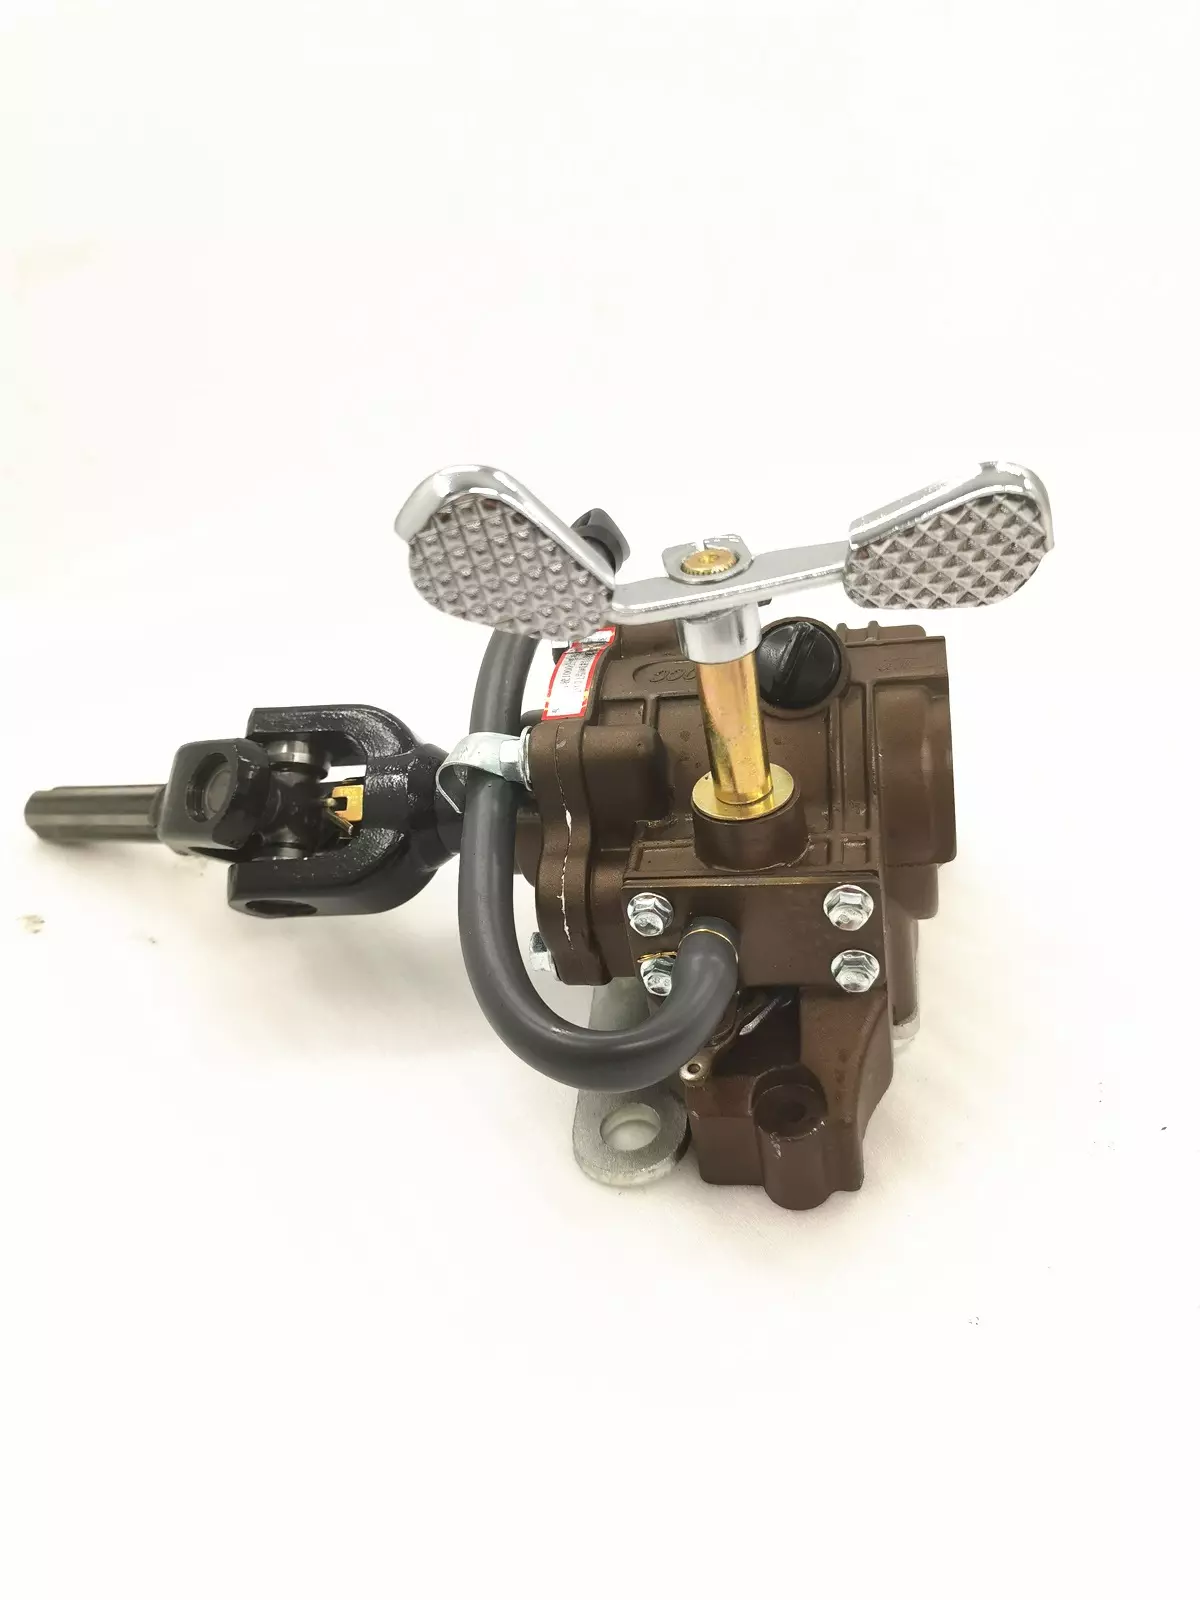 DAYANG Chuanyu 280 reverse gear box for Engine Motor Trike 3 Wheel Motorcycle Tricycle with big size base plate